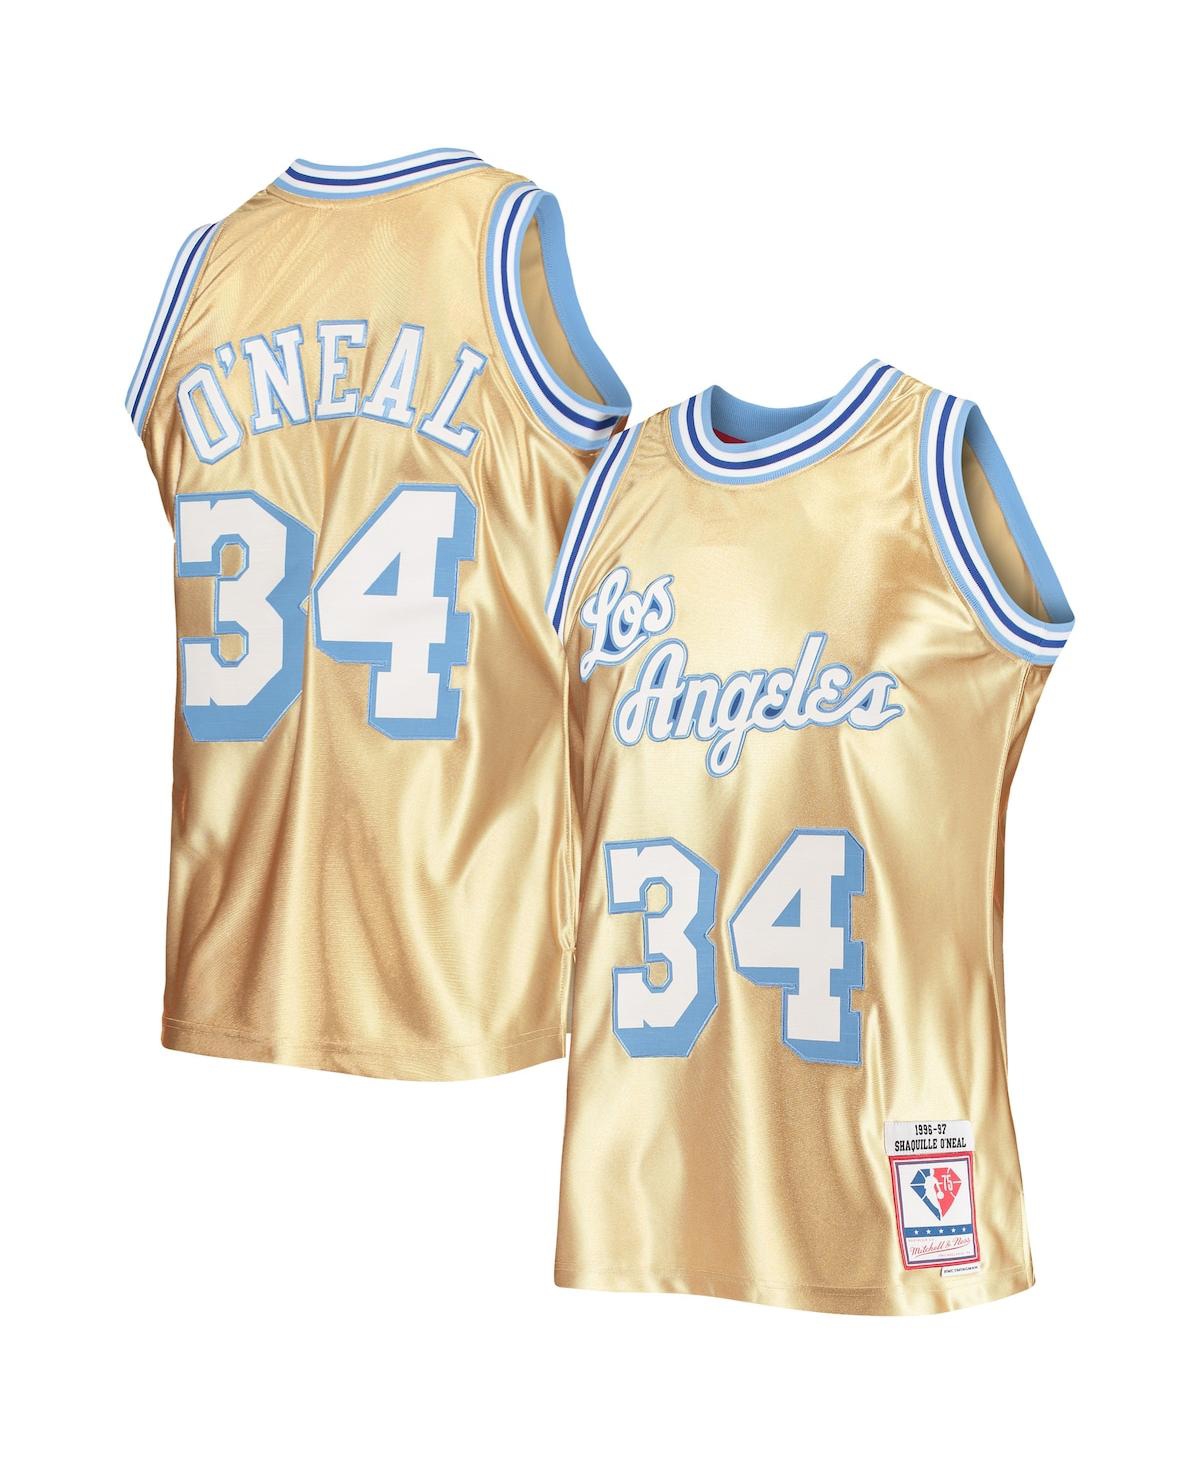 Men's Mitchell & Ness Shaquille O'Neal Gold Los Angeles Lakers 75th Anniversary 1996-97 Hardwood Classics Swingman Jersey - Gold